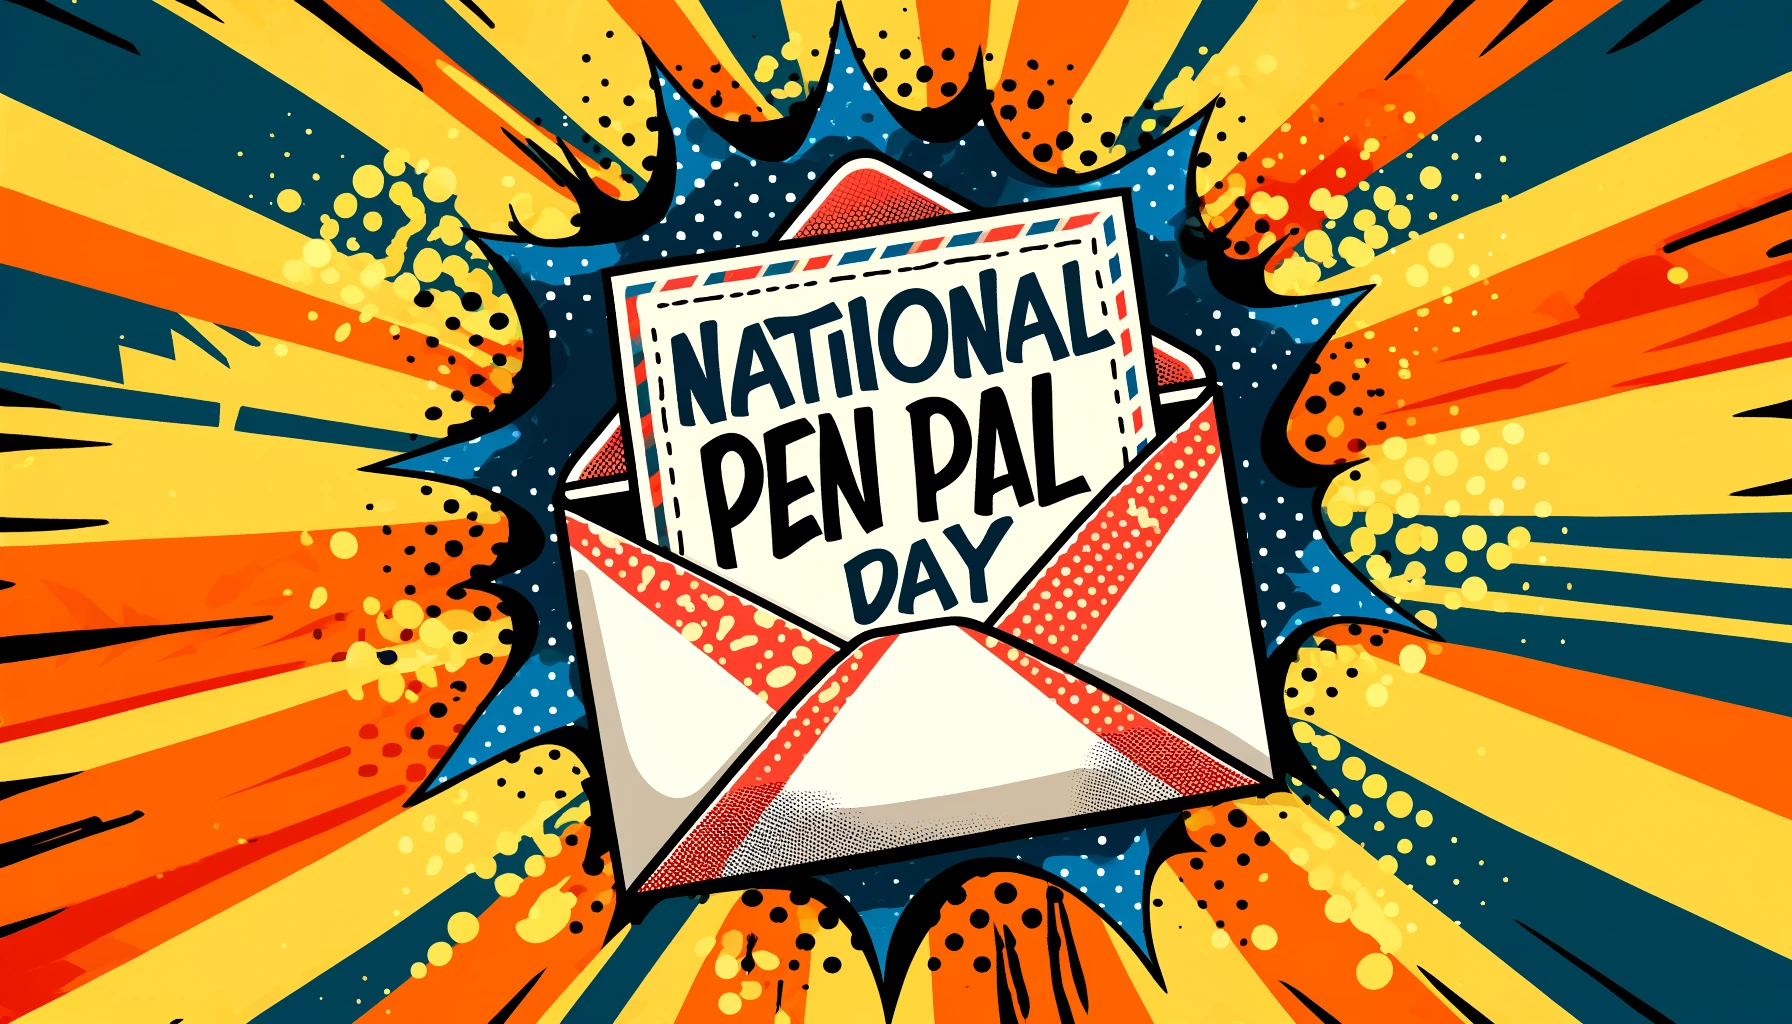 National Pen Pal Day